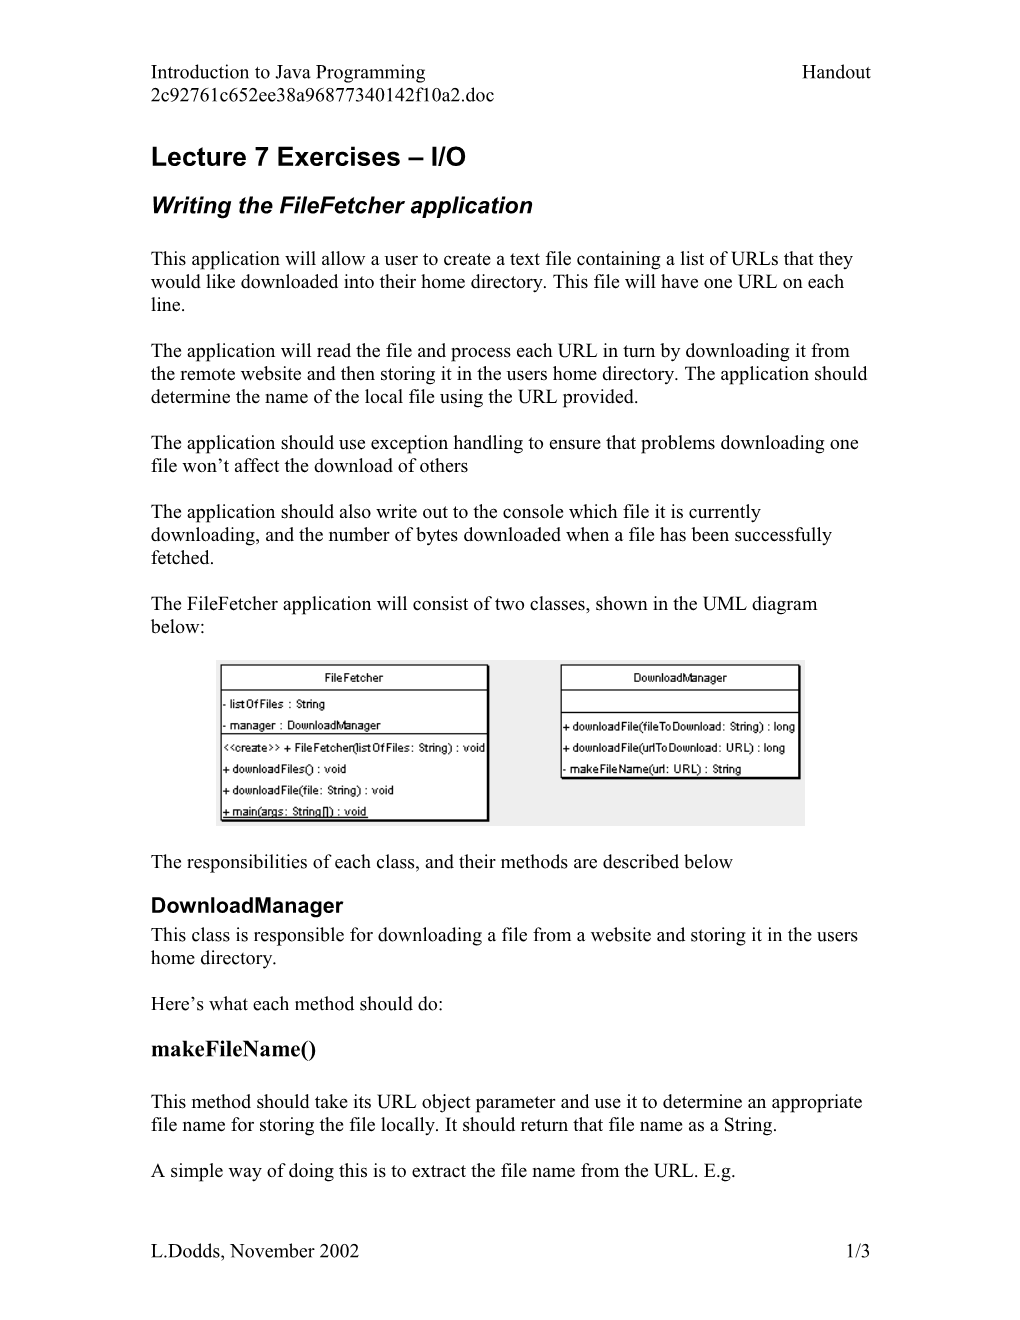 Lecture 3 Exercises Writing Applications s1